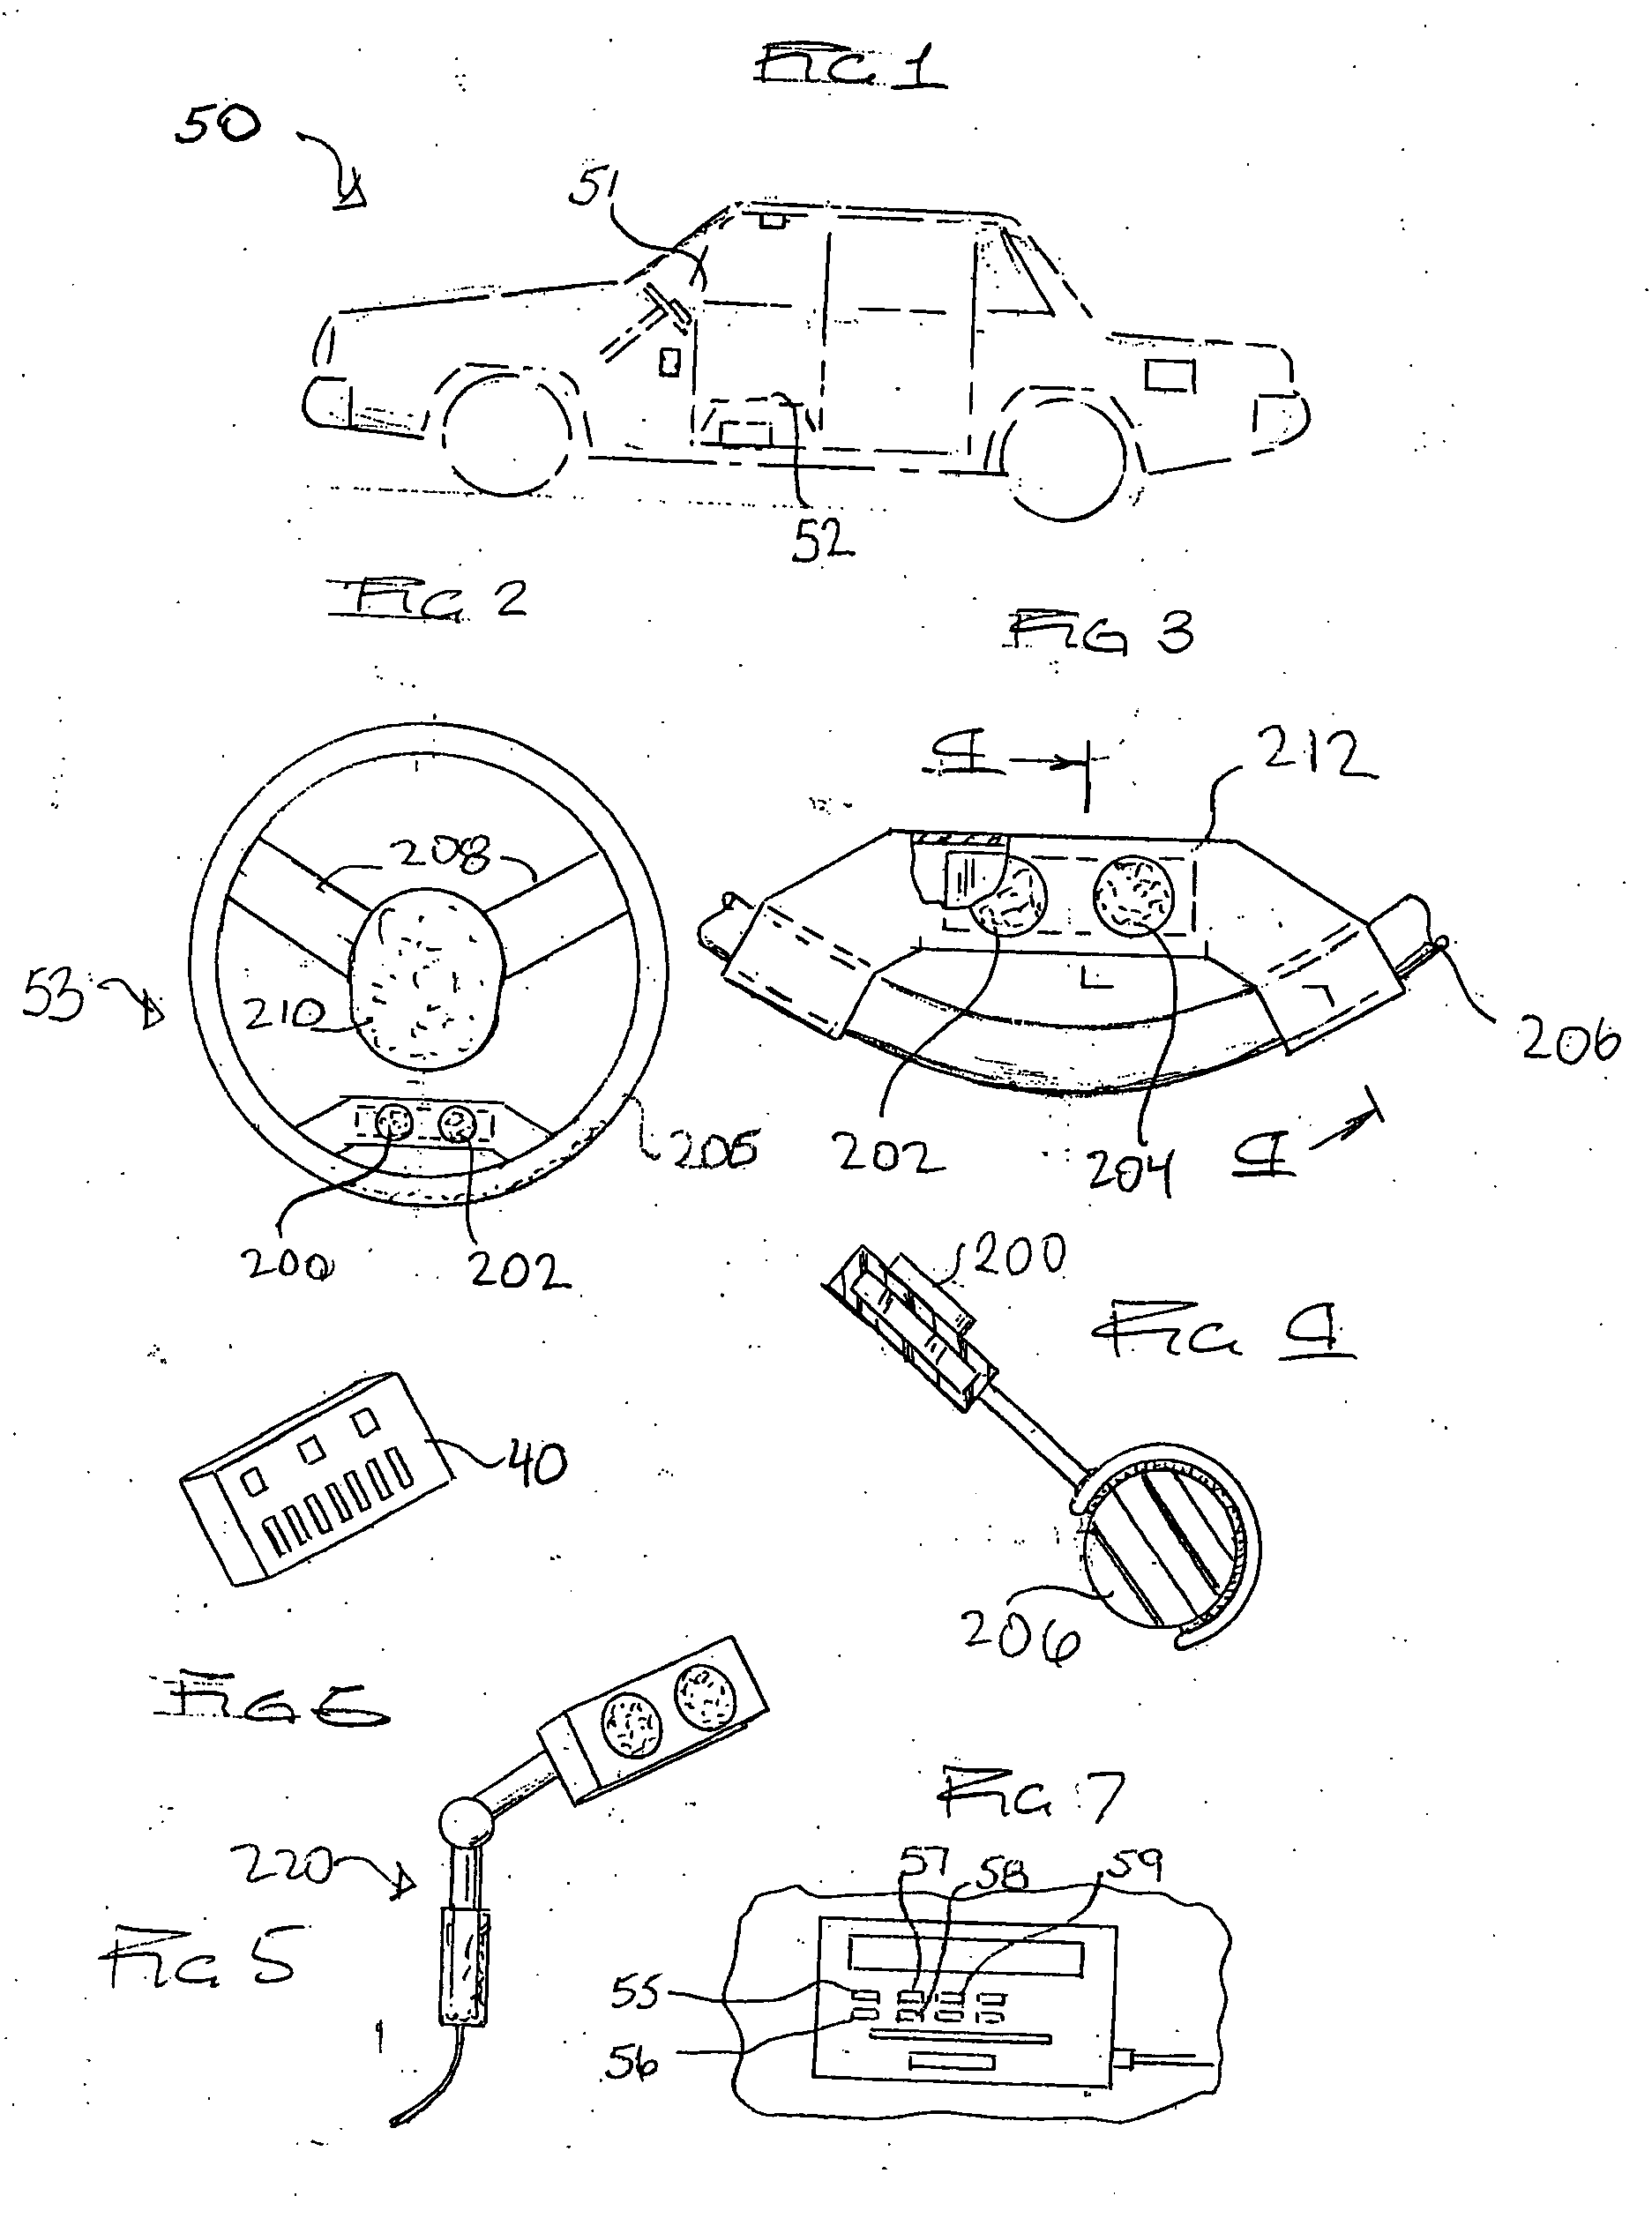 Mobile entertainment system and method